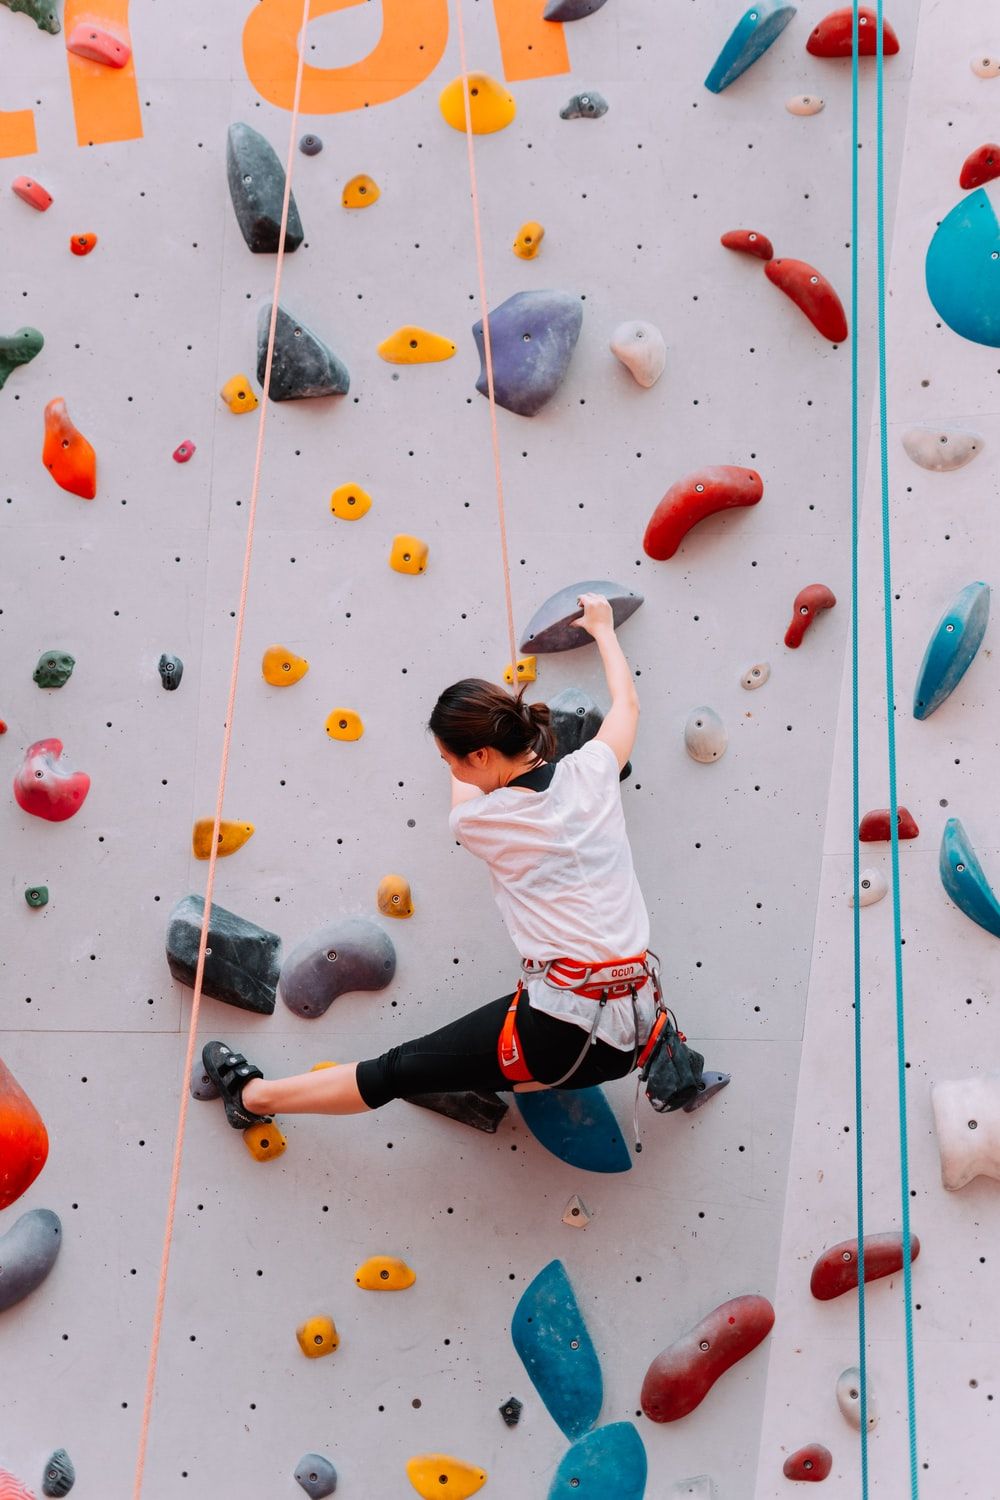 Climbing Picture. Download Free Image